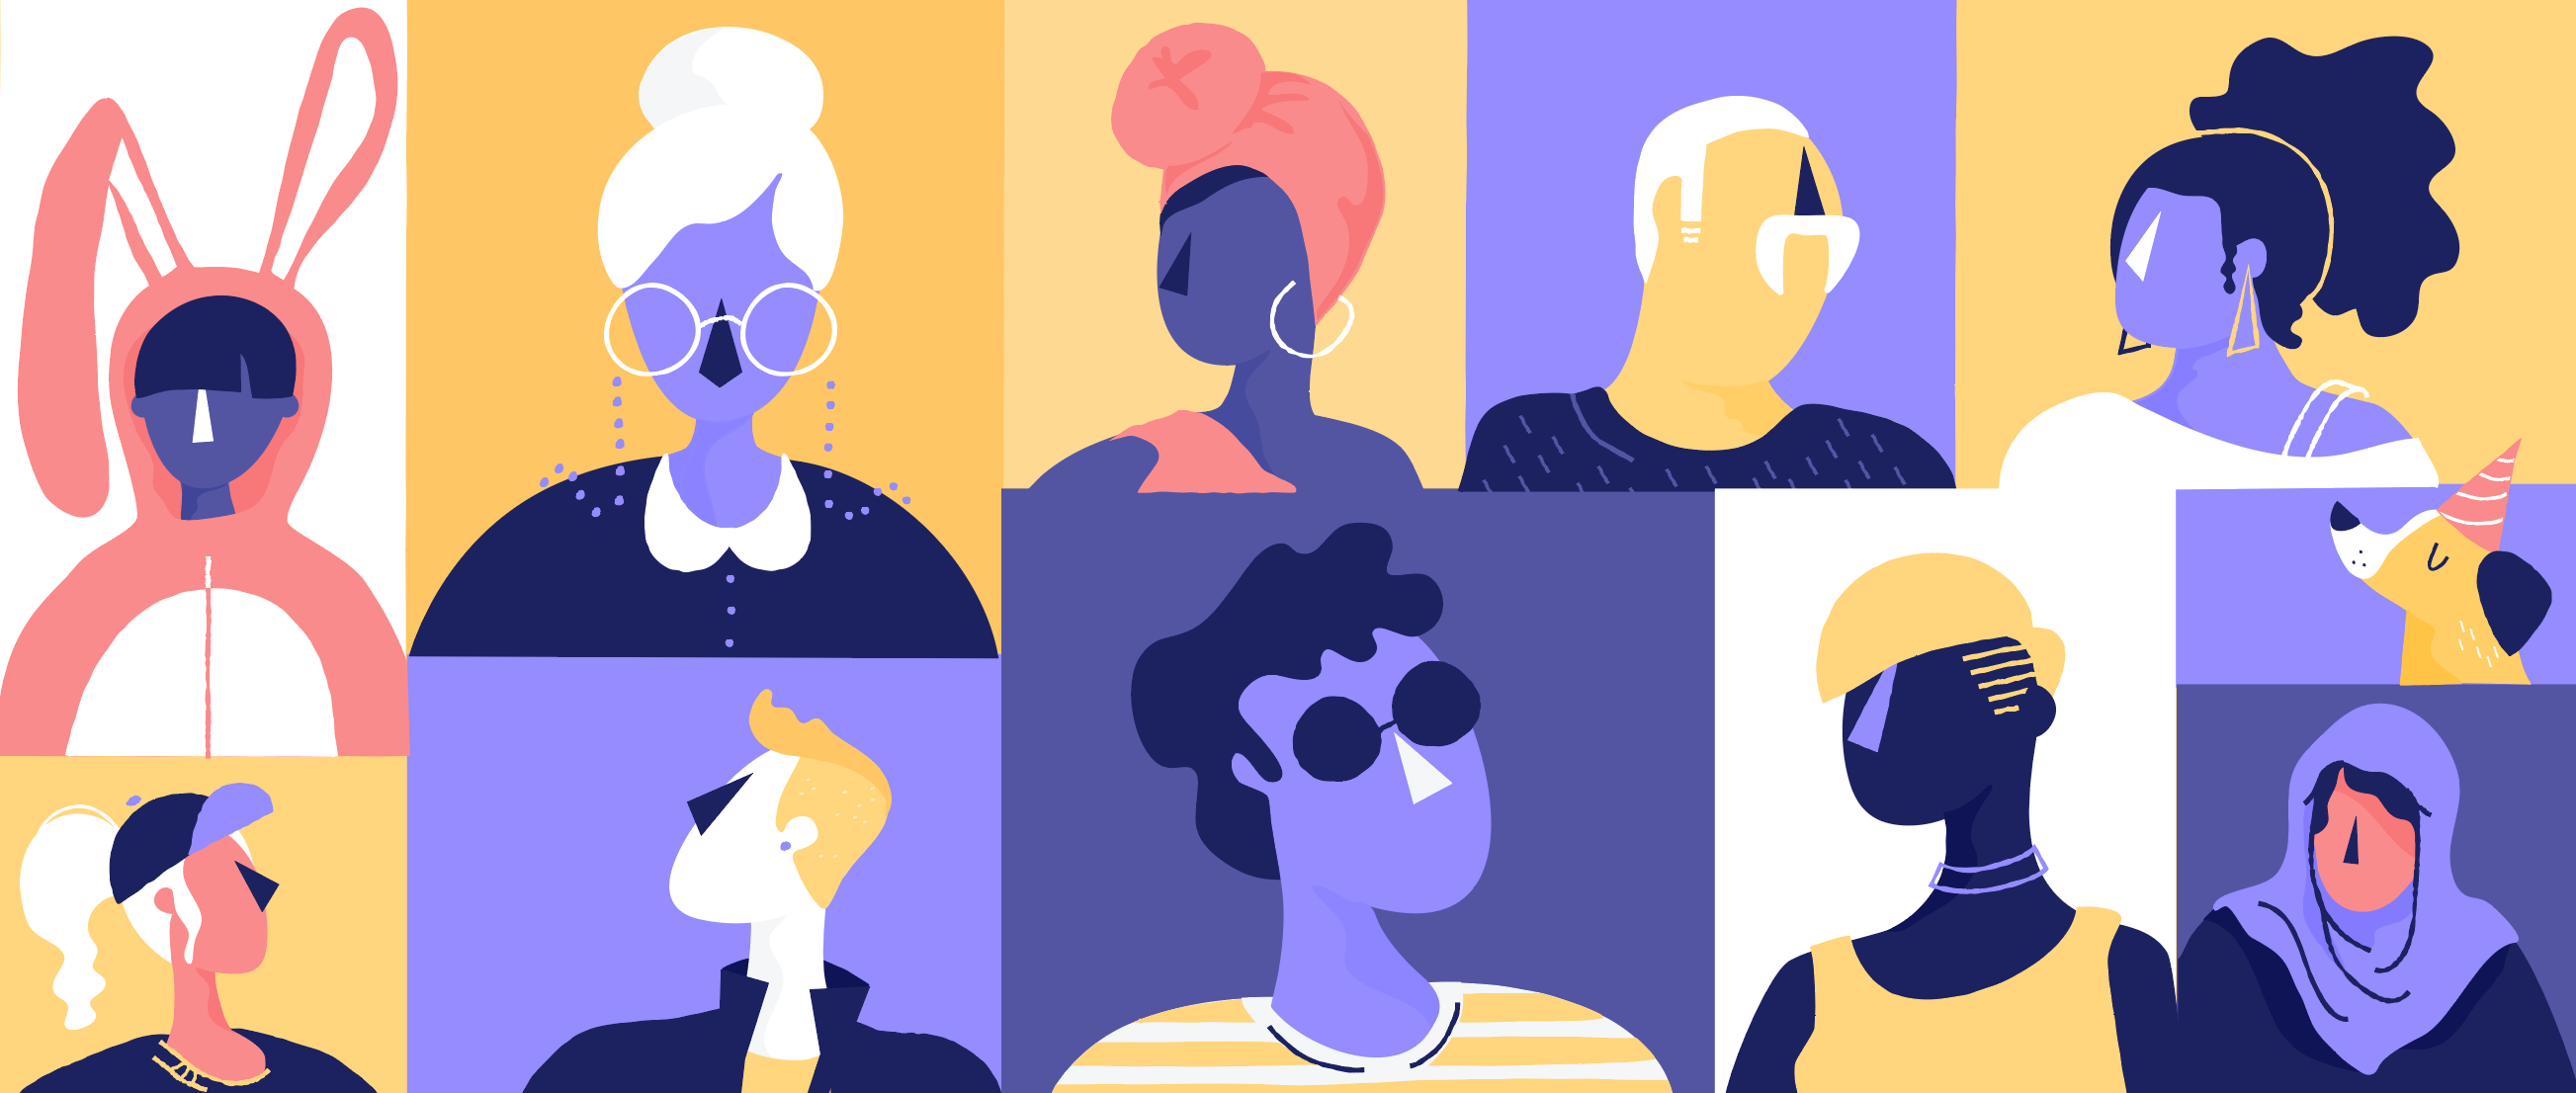 You Can T Hust Draw Purple People And Call It Diversity By Meg Robichaud Shopify Ux